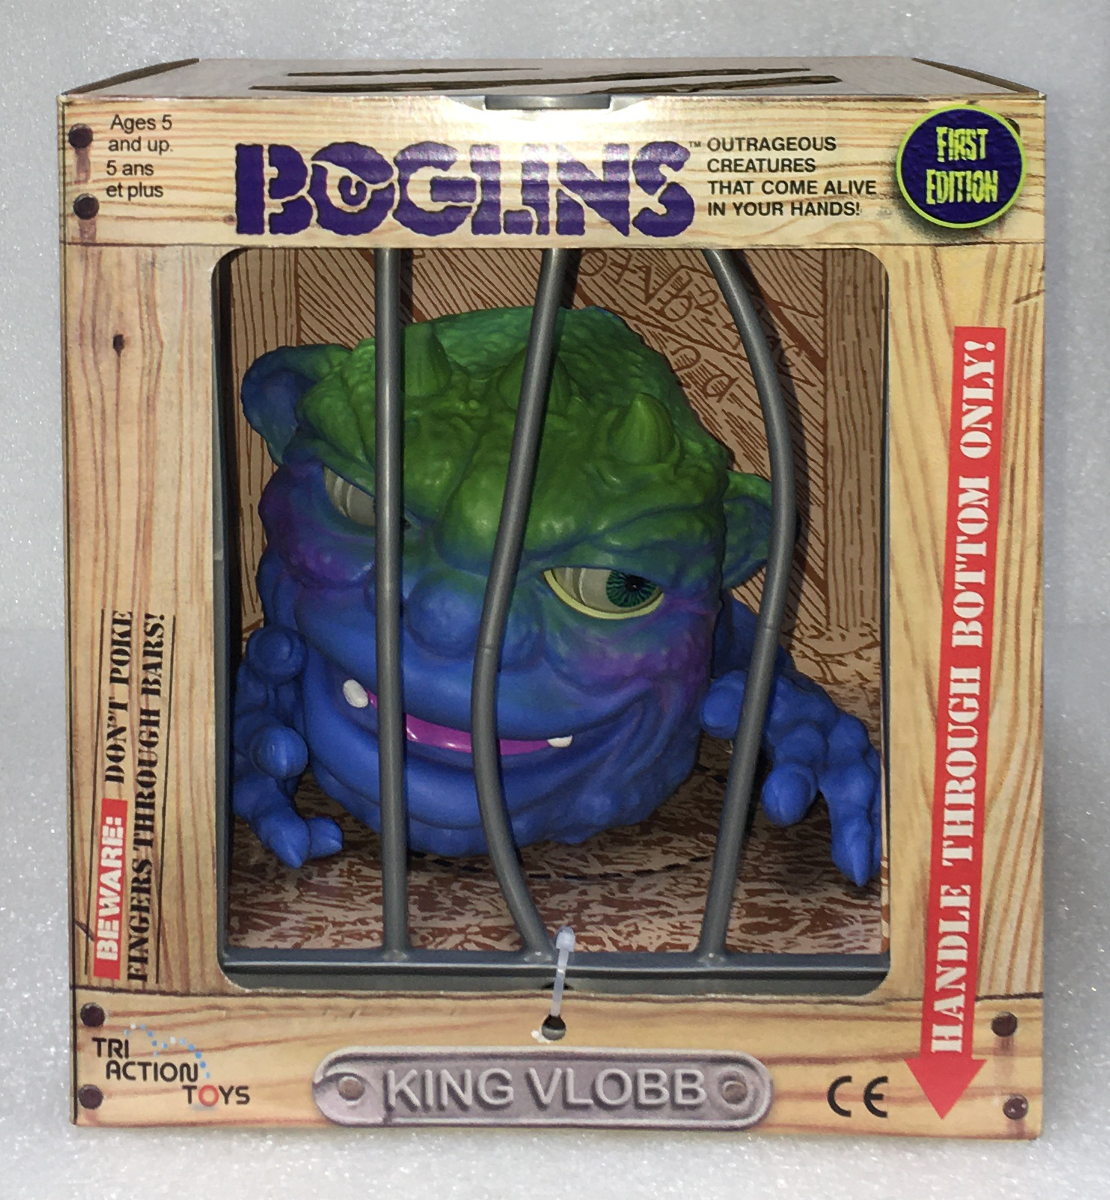 MIB Tri Action Toys First Edition King Vlobb Boglins Puppet: Mint in Box 1